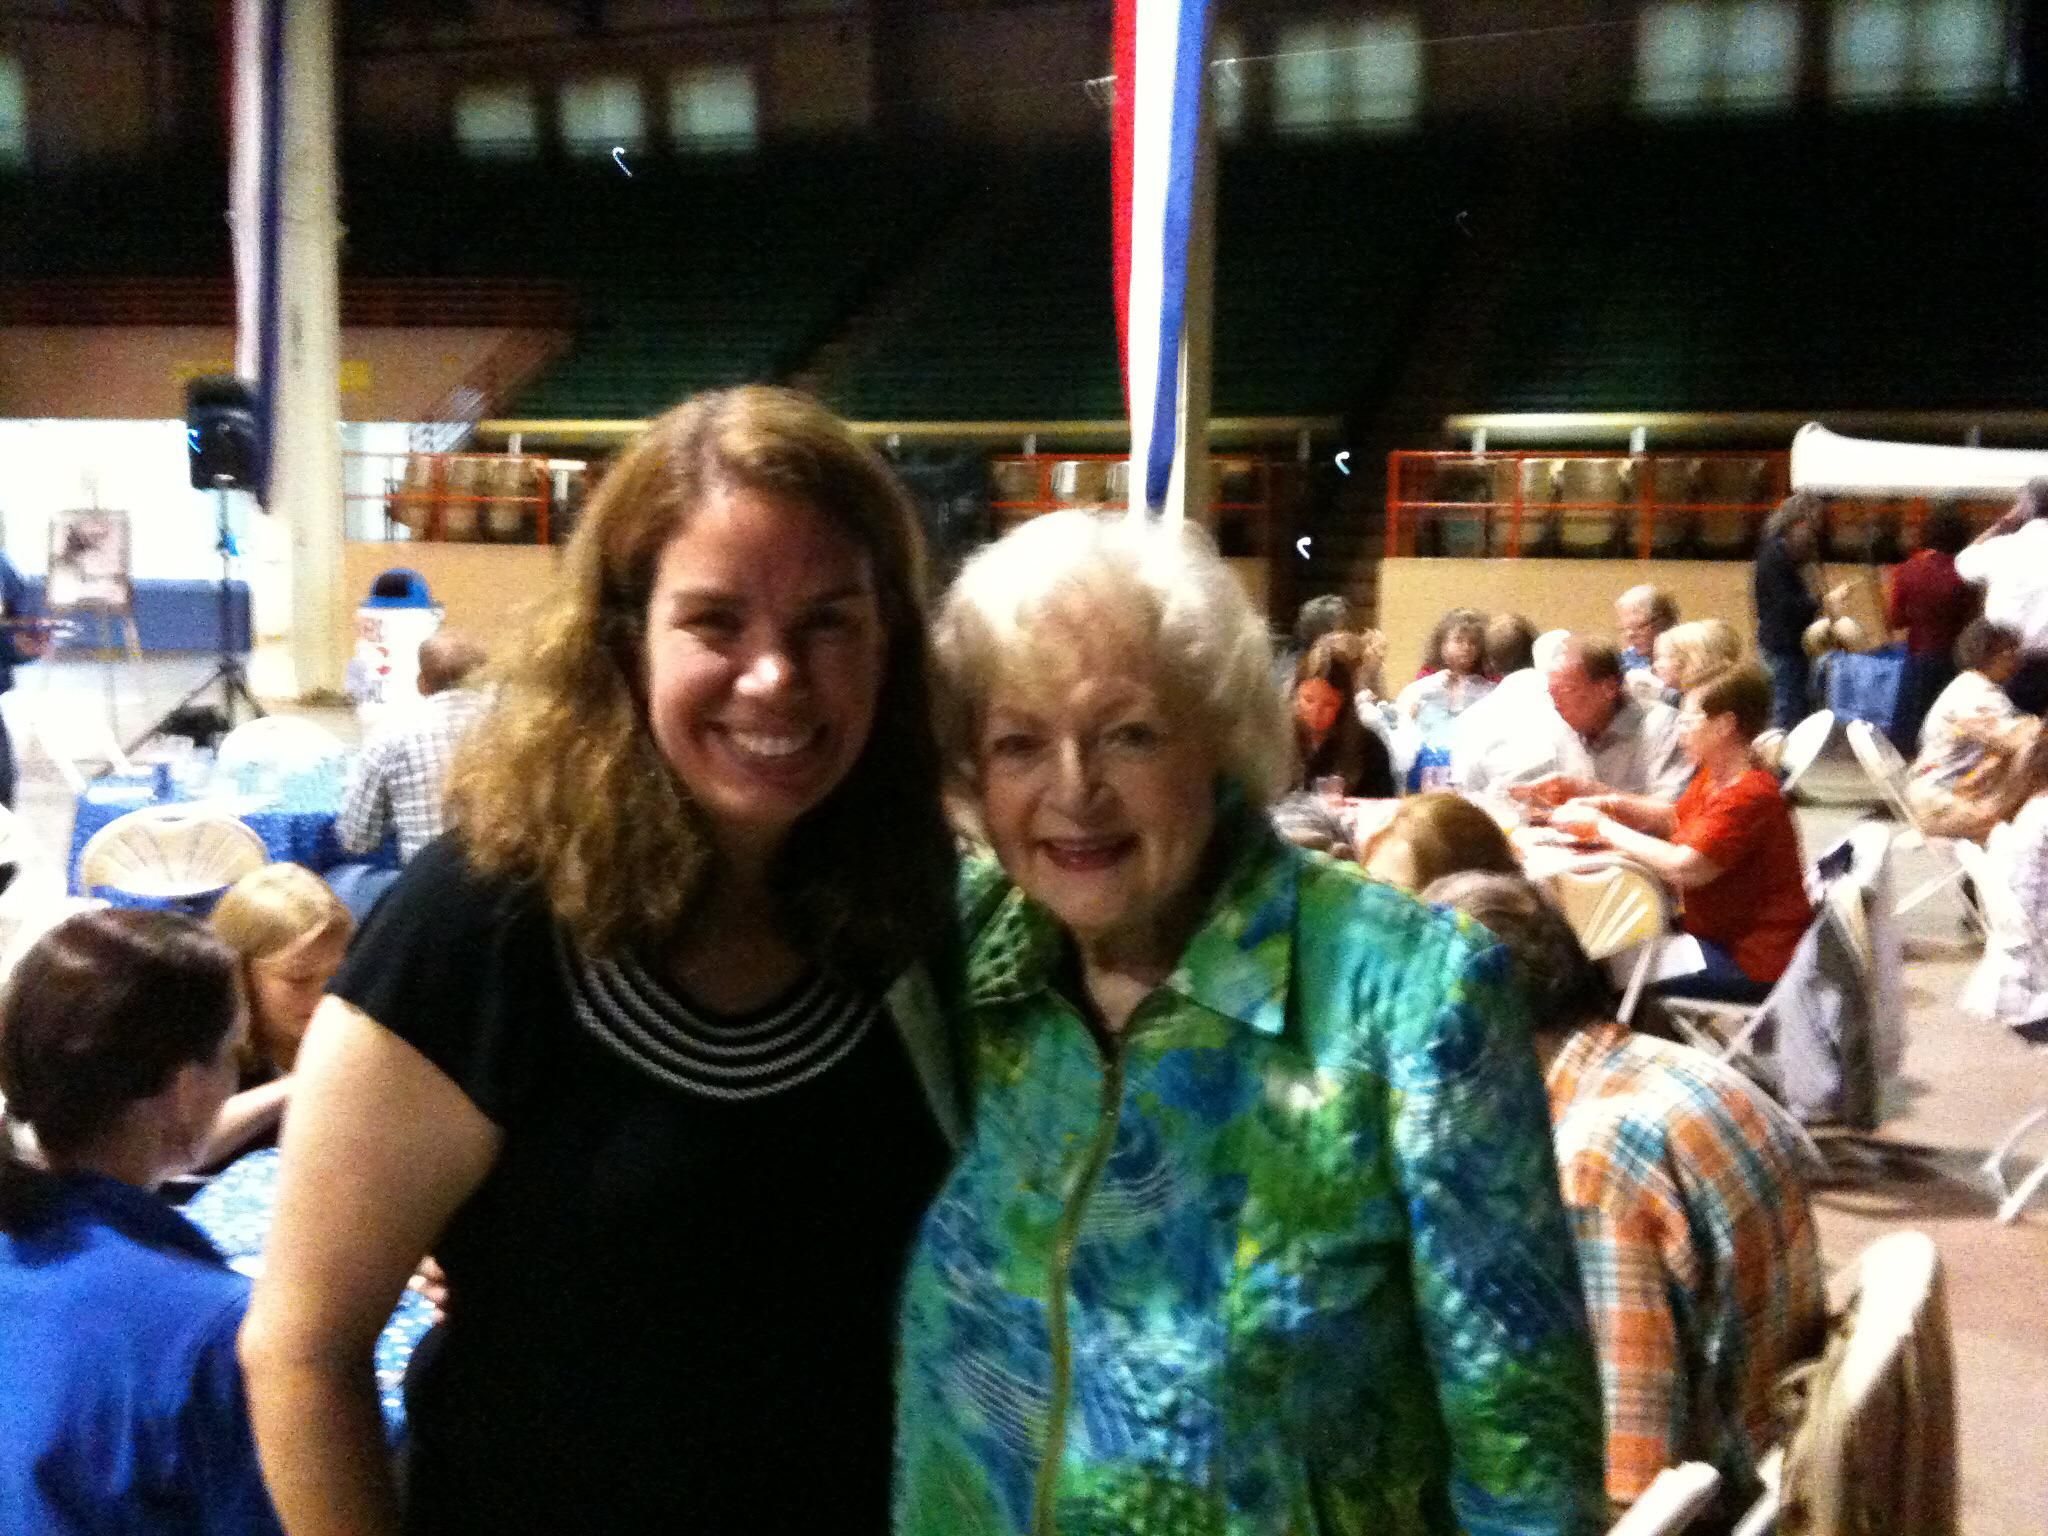 Betty White and I at an animal research foundation dinner in 2009. We rode the same bus transport from our hotel. She arrived mostly drunk, and I had to show her how to find the buffet.